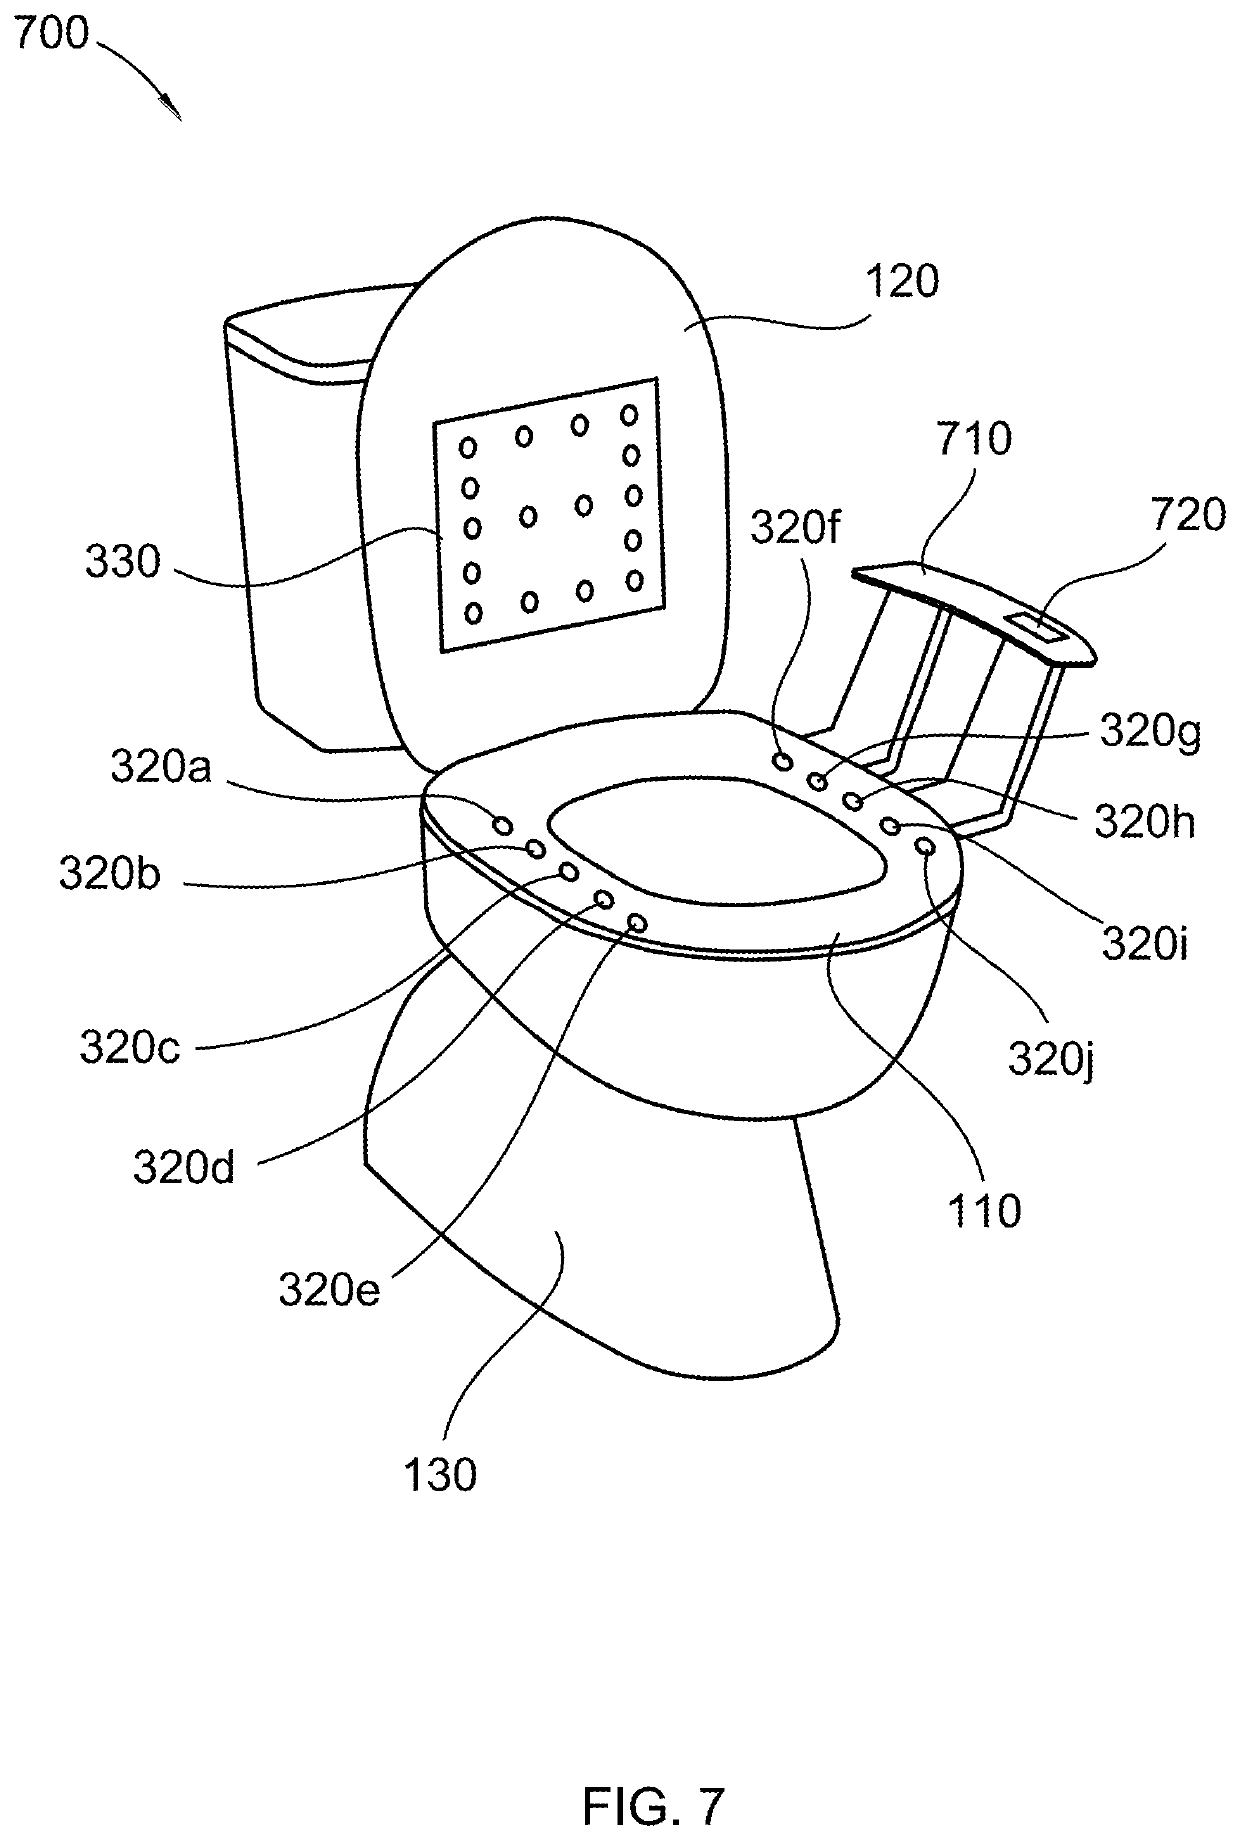 Medical toilet with acoustic transducers for collecting health-related measurements